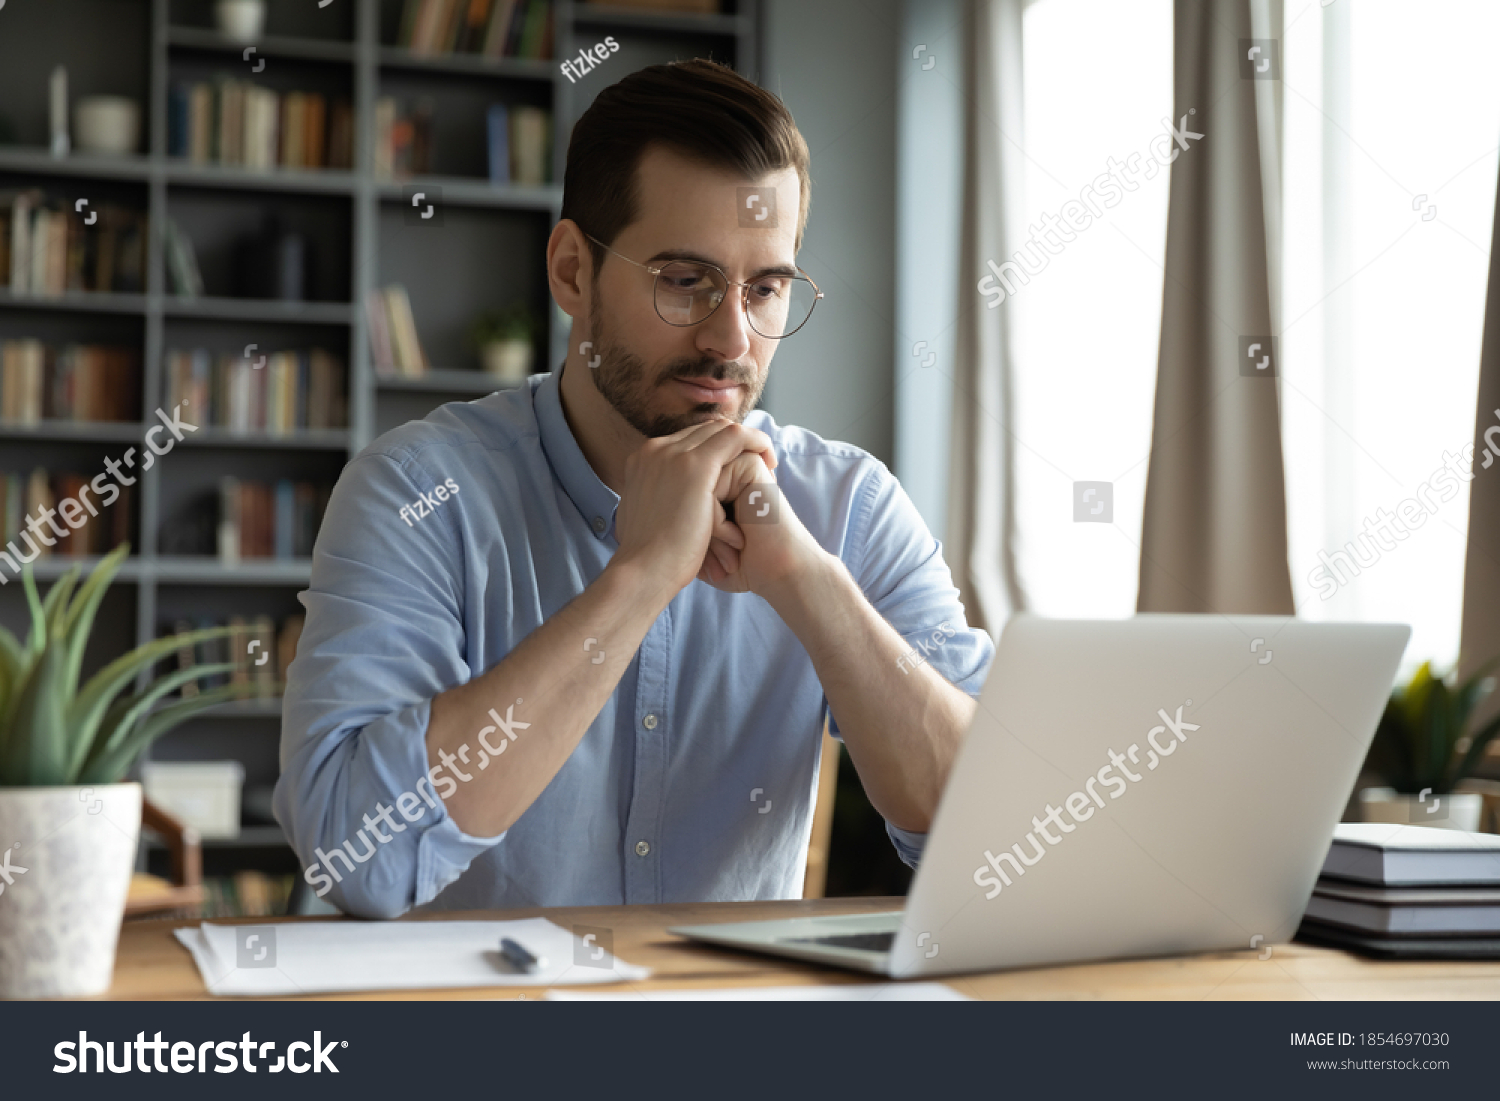 Young businessman sit at home office desk looks at laptop read media news online, learn new e app, analyzing project, stuck with challenge business task, thinks over problem, search solution concept #1854697030